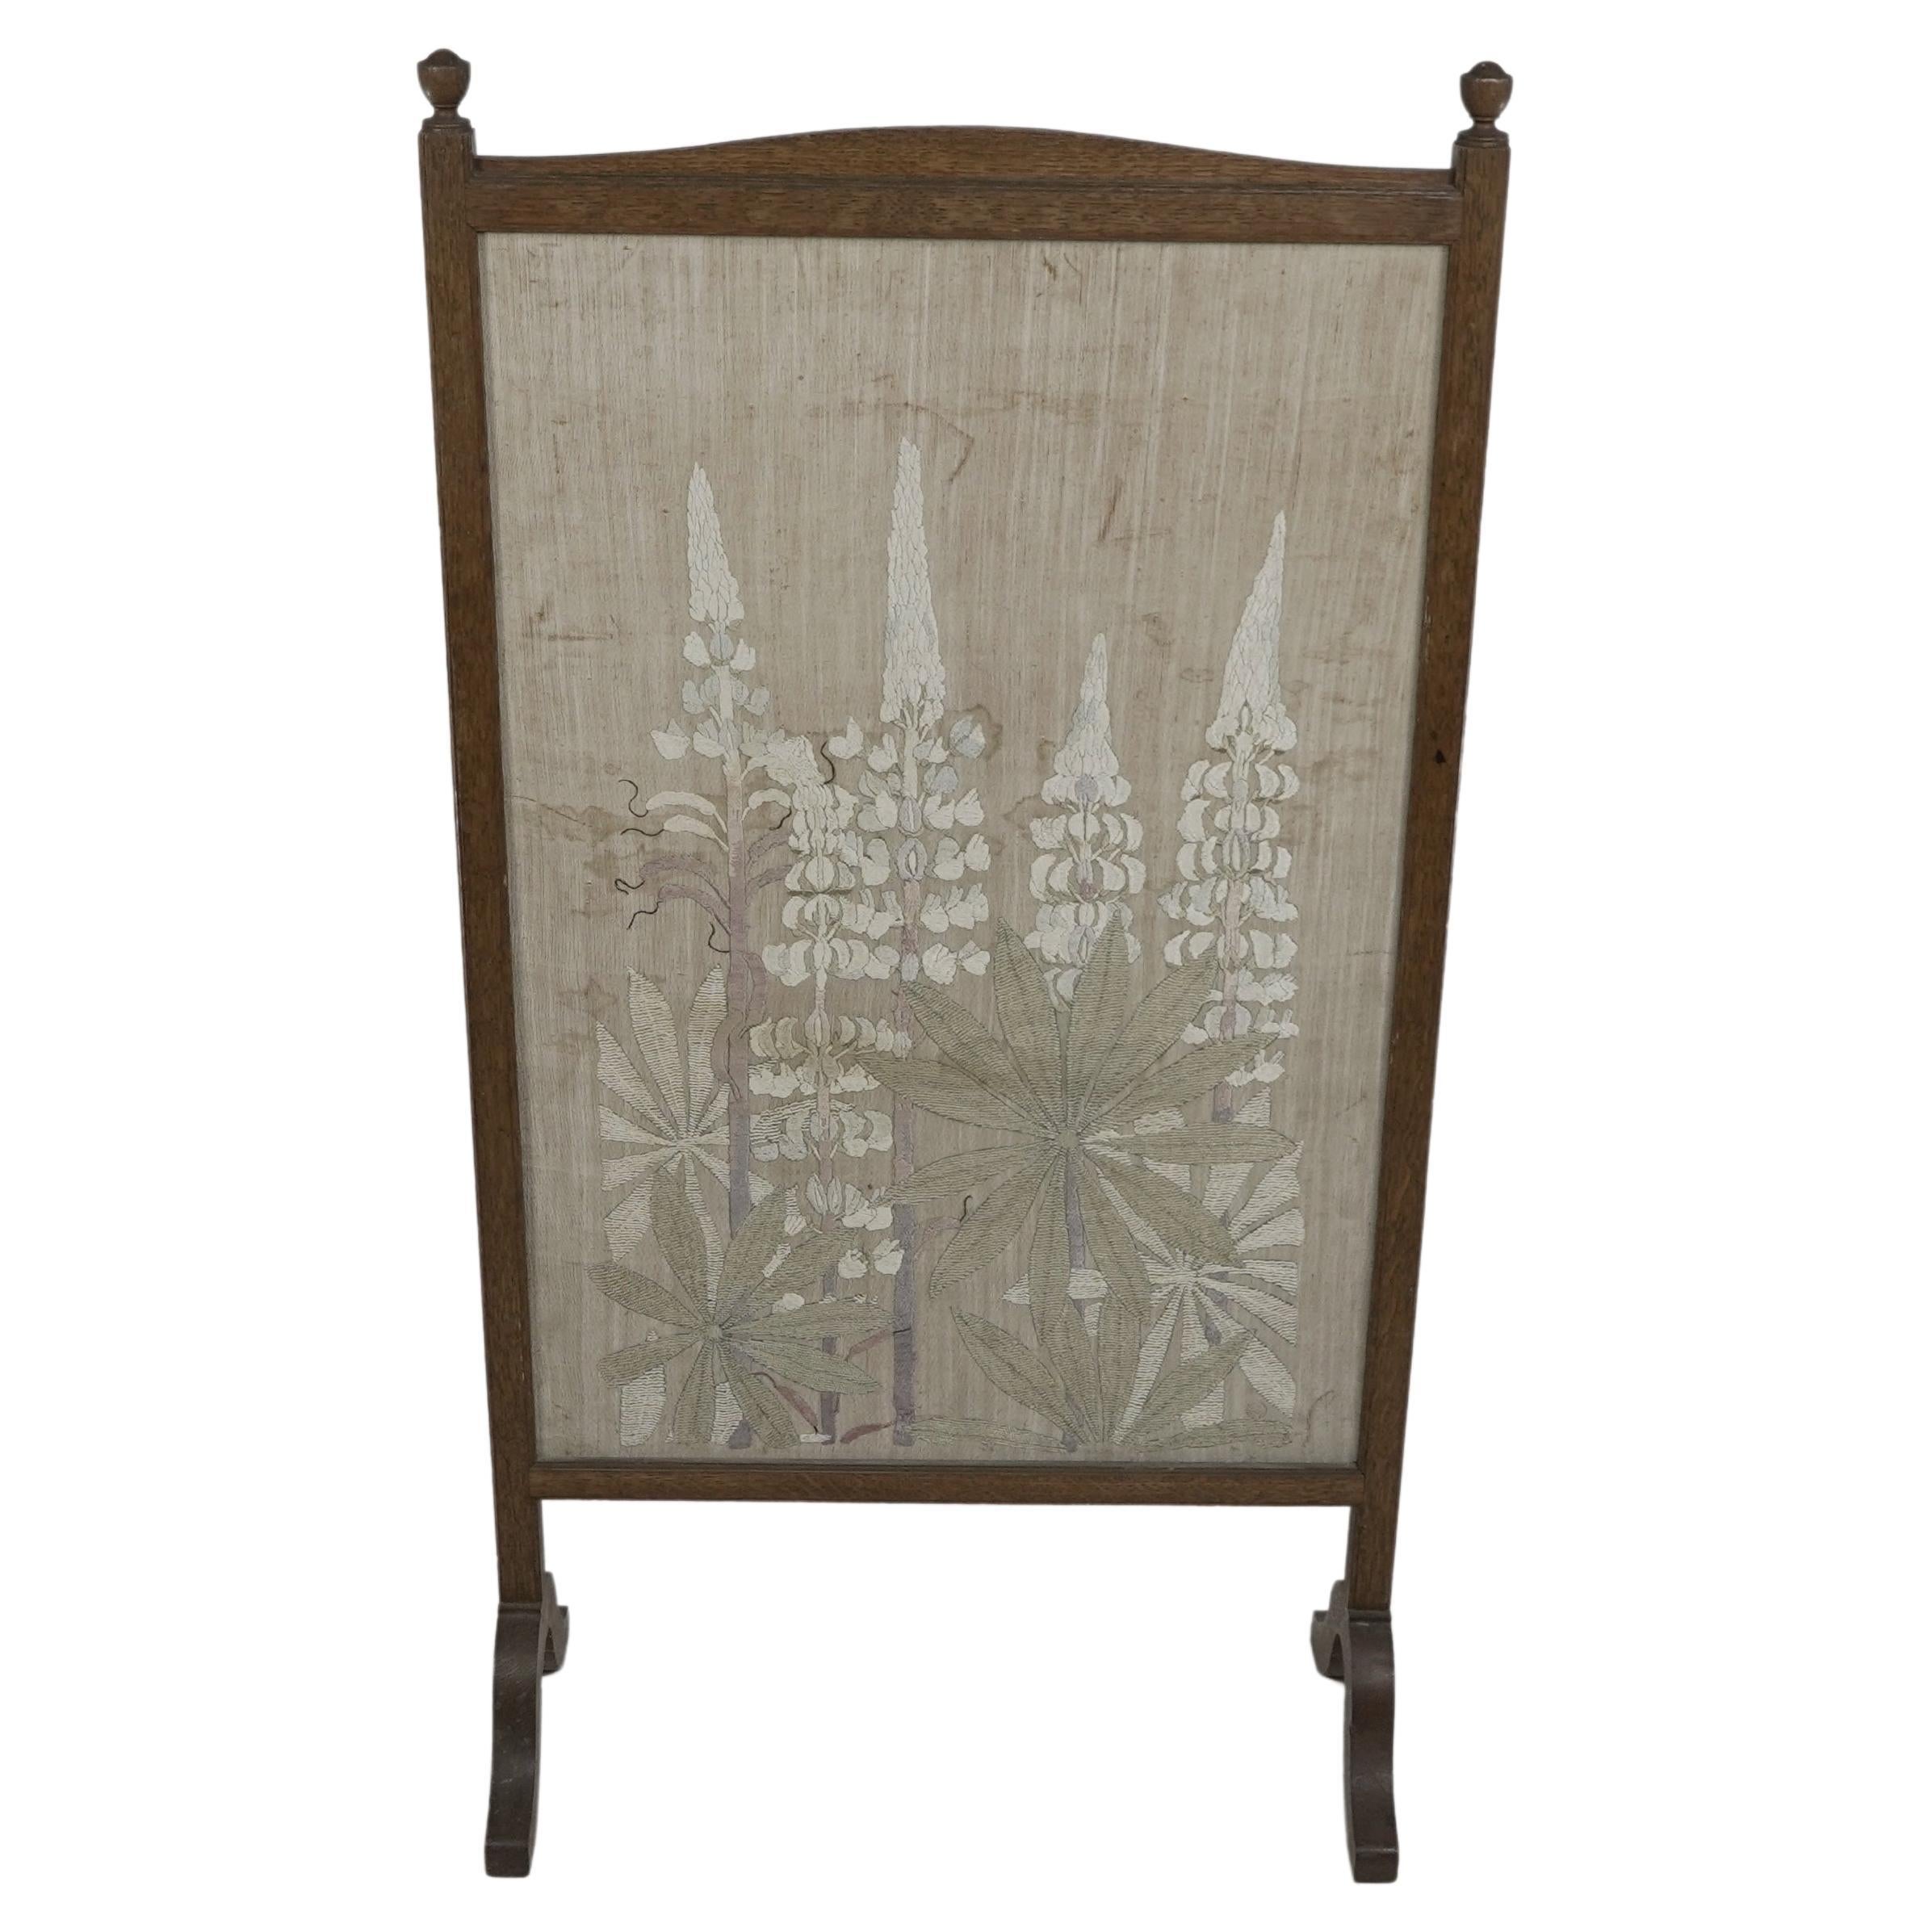 Selwyn Image for the Century Guild. Floral embroidery fire screen with foxgloves For Sale